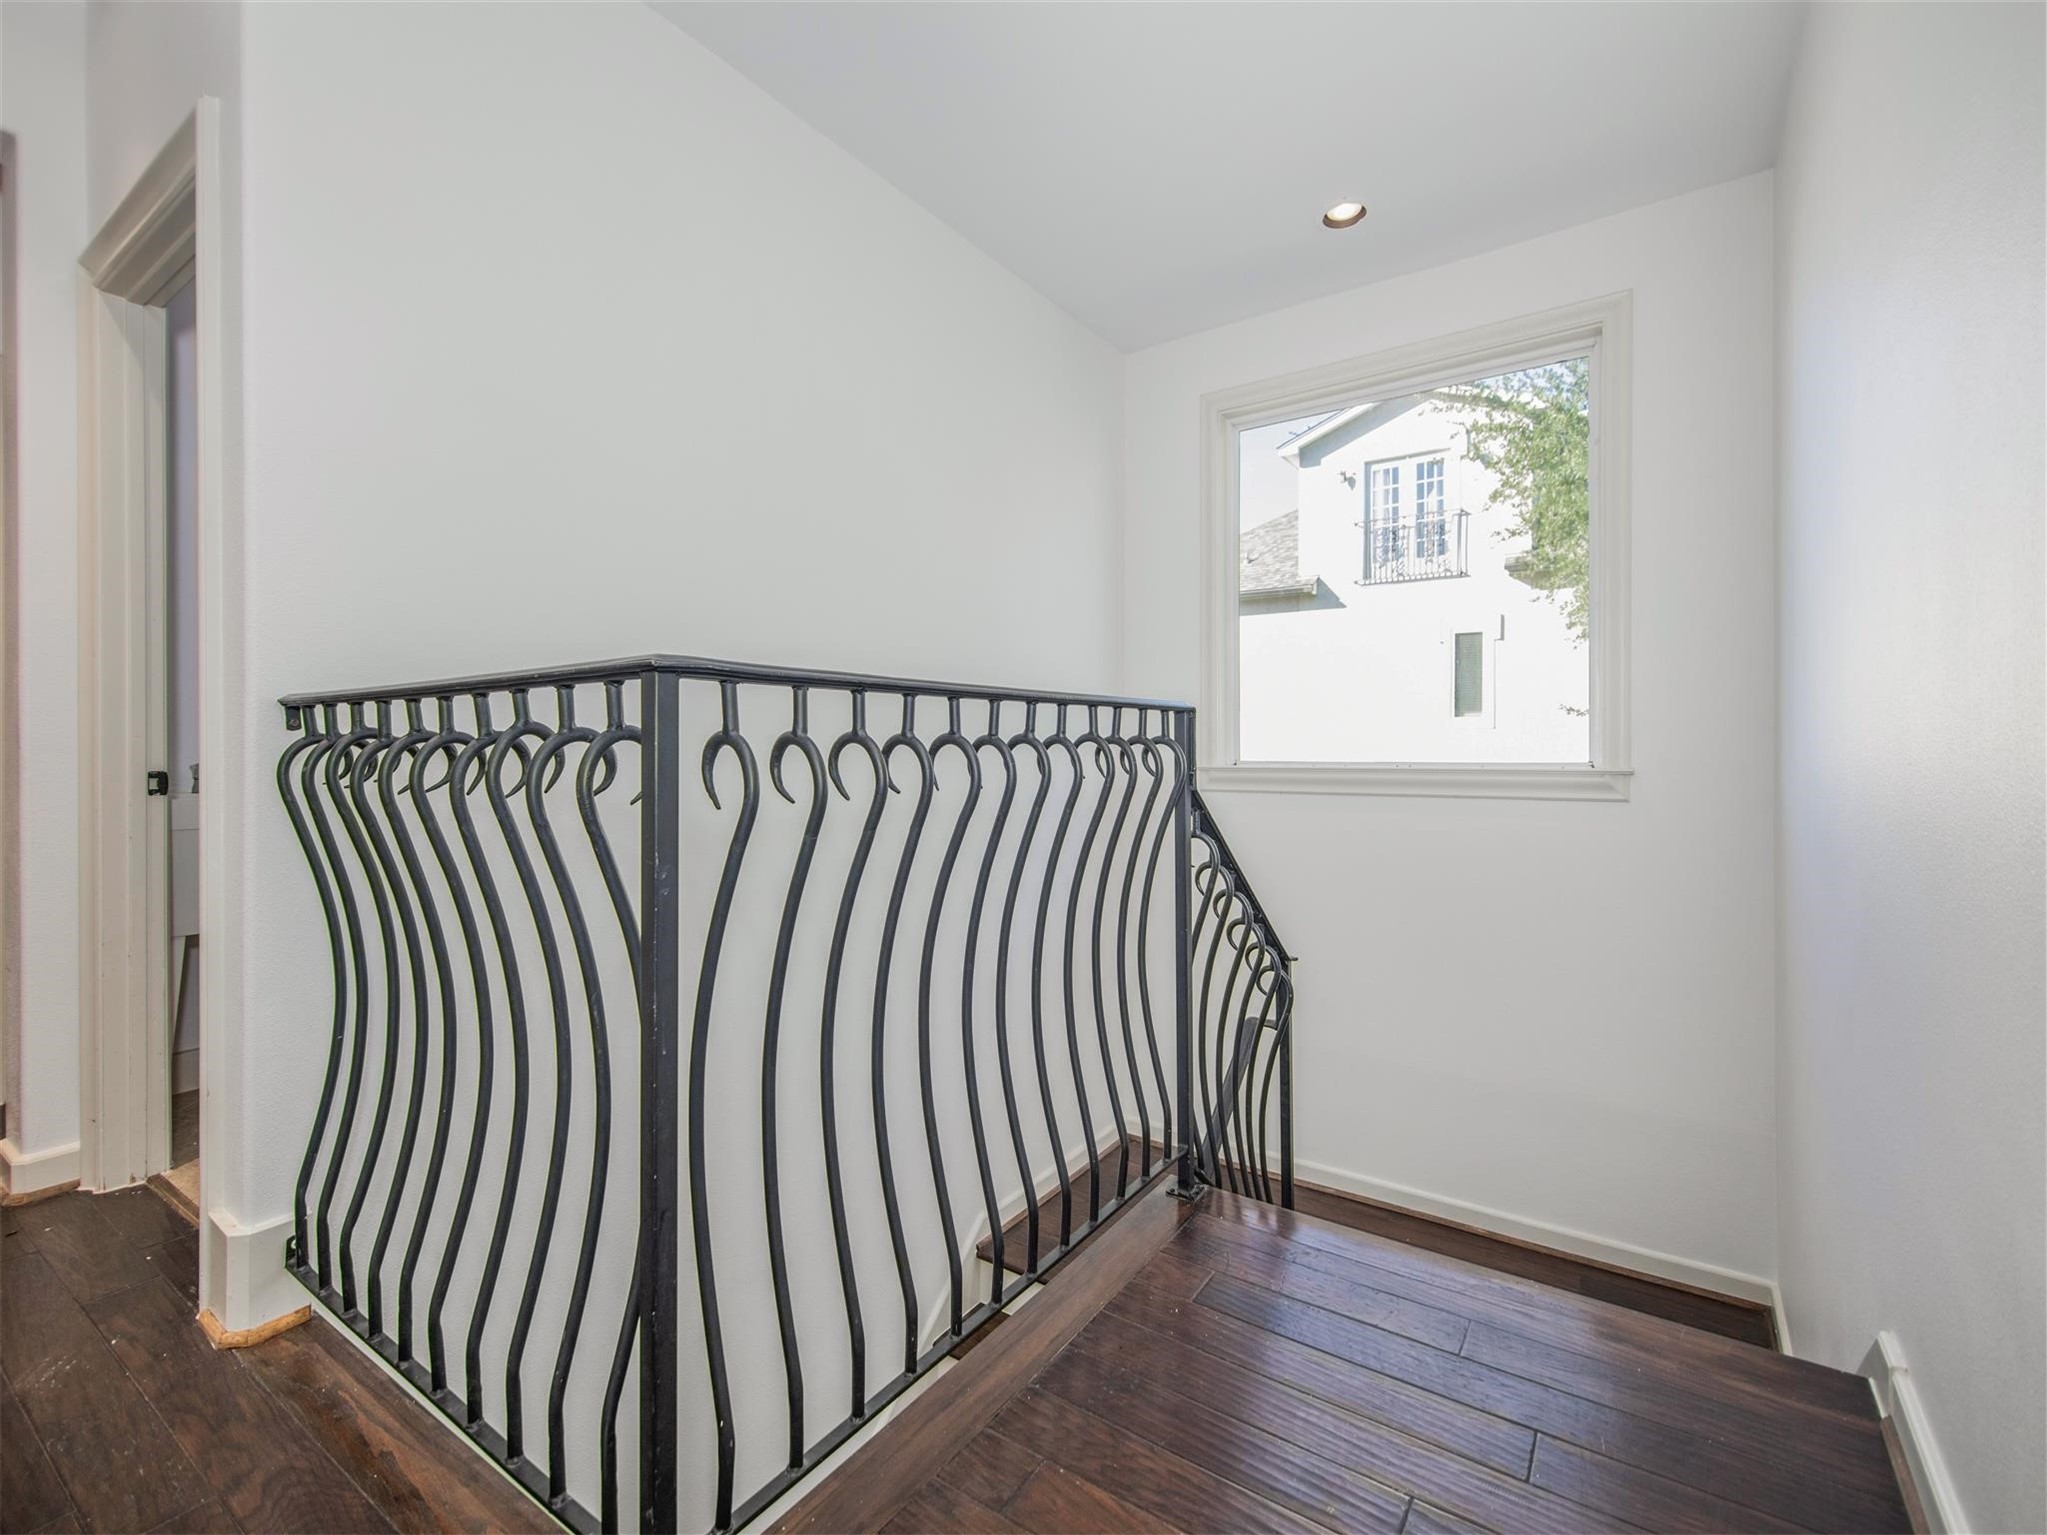 View of custom wrought iron stairwell leading to second floor landing.